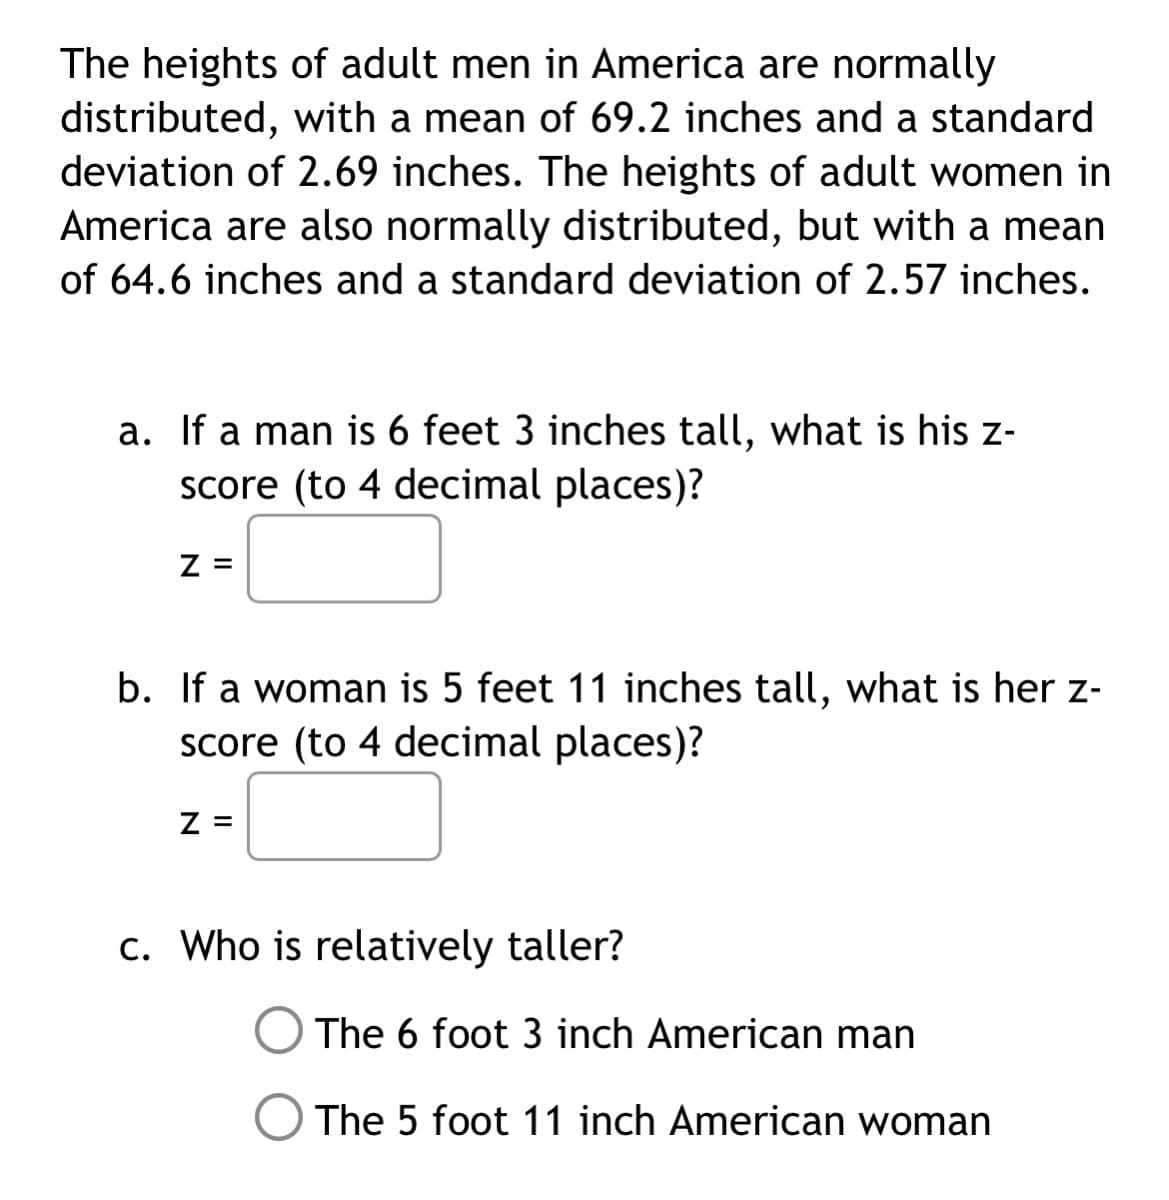 The heights of adult men in America are normally
distributed, with a mean of 69.2 inches and a standard
deviation of 2.69 inches. The heights of adult women in
America are also normally distributed, but with a mean
of 64.6 inches and a standard deviation of 2.57 inches.
a. If a man is 6 feet 3 inches tall, what is his z-
score (to 4 decimal places)?
Z =
b. If a woman is 5 feet 11 inches tall, what is her z-
score (to 4 decimal places)?
Z =
c. Who is relatively taller?
The 6 foot 3 inch American man
The 5 foot 11 inch American woman